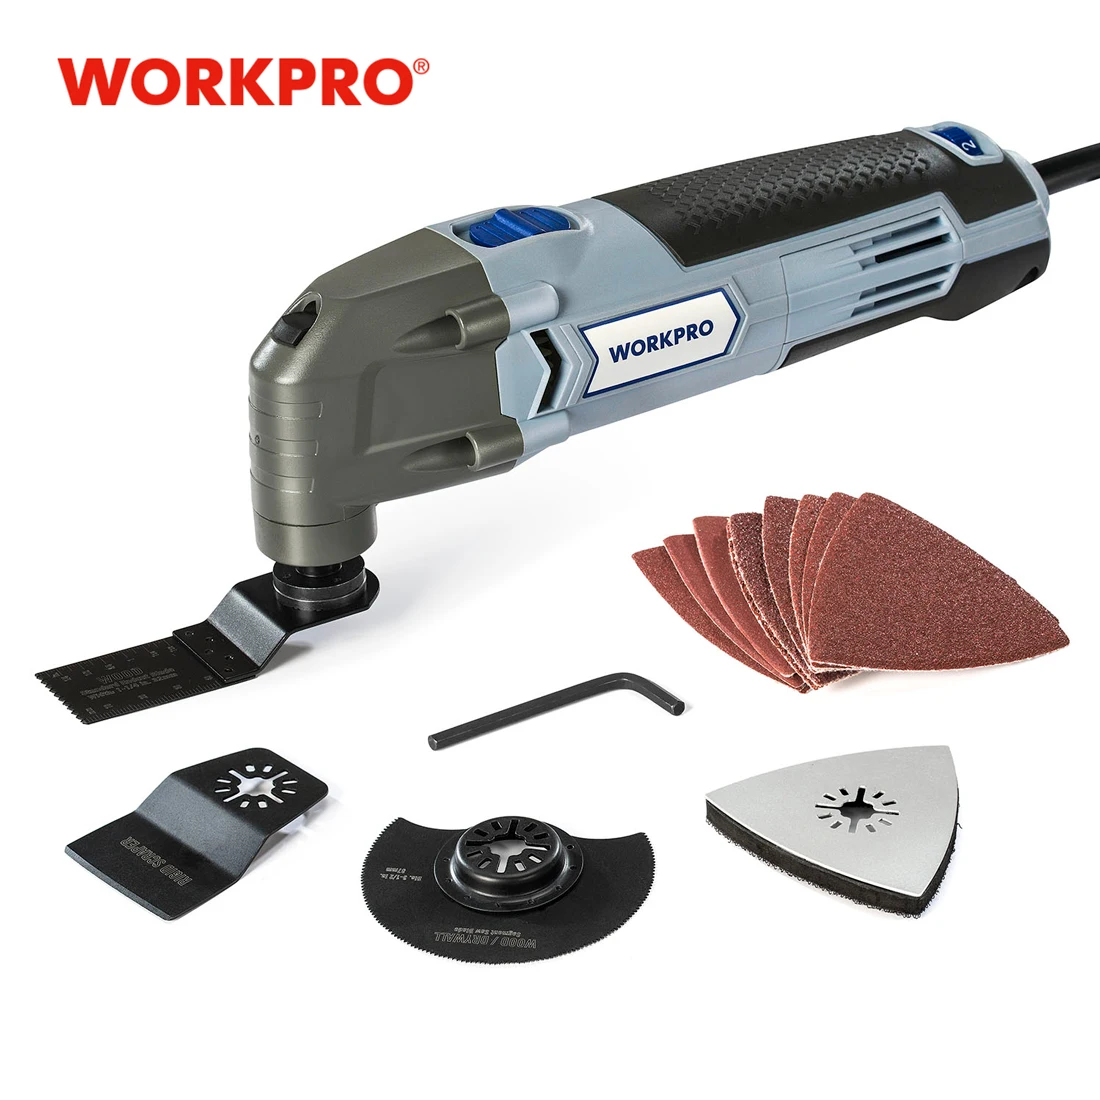 WORKPRO Oscillating Tool 220V Electric Trimmer Saw for Wood Working 300W